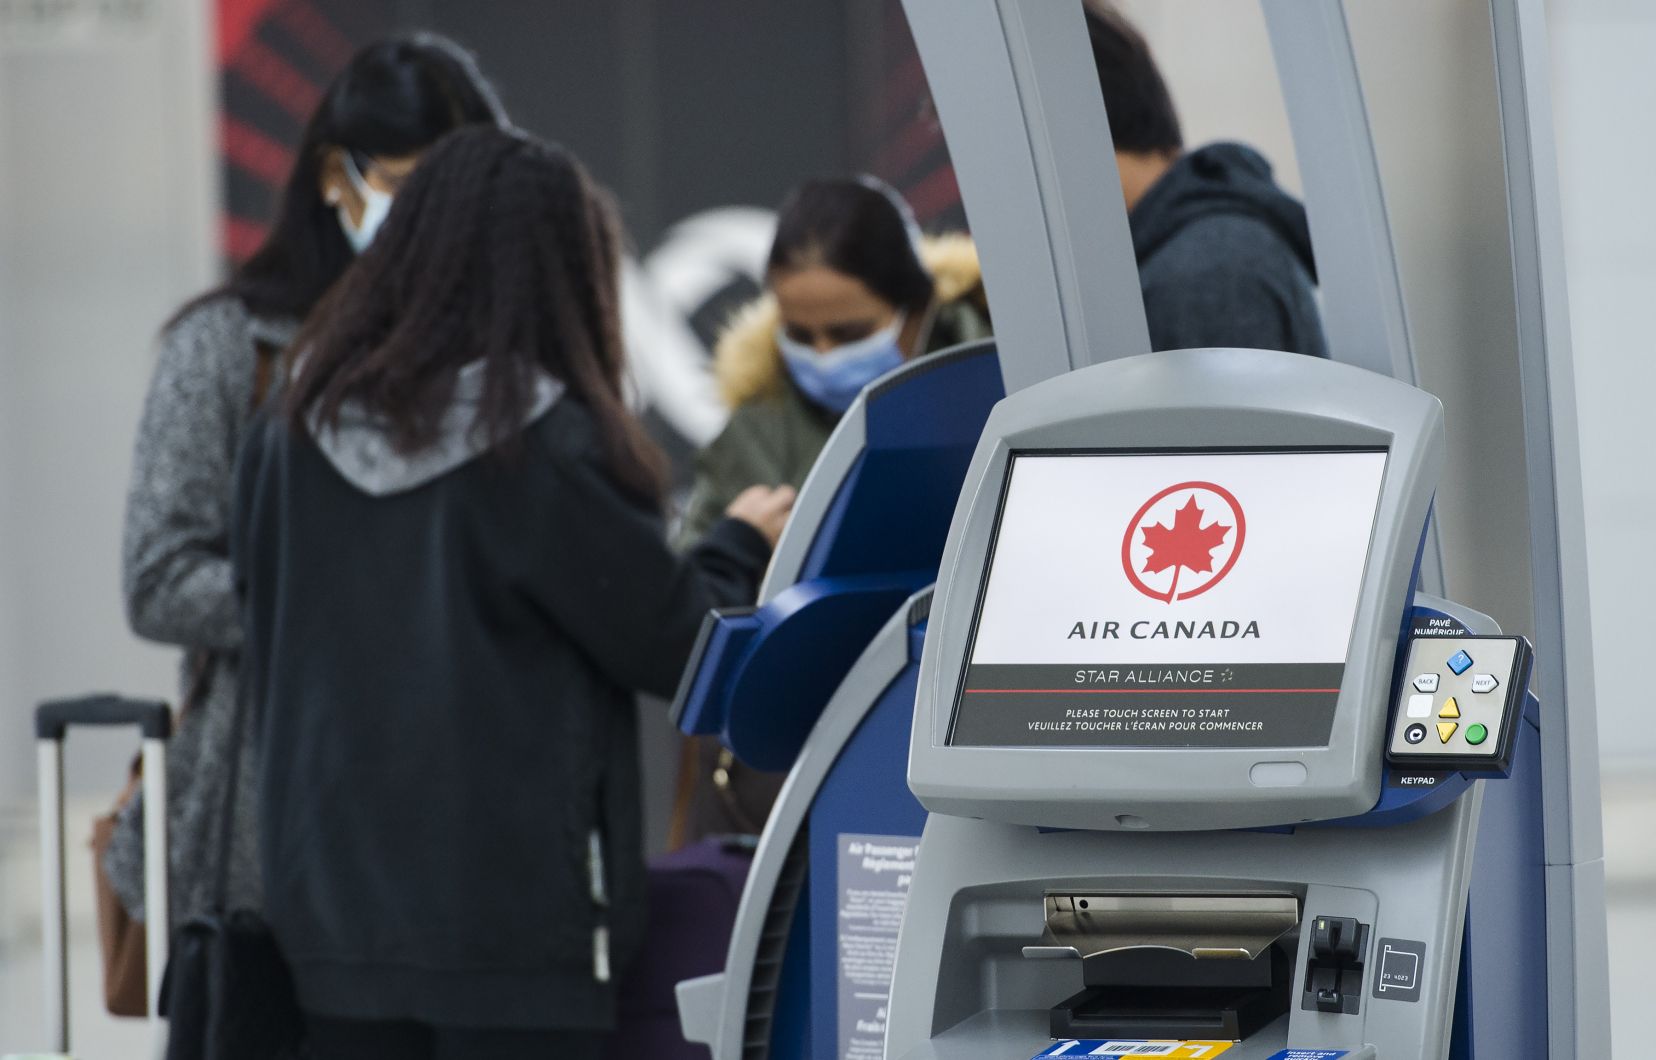 Air Canada is recalling more than 2,600 employees

